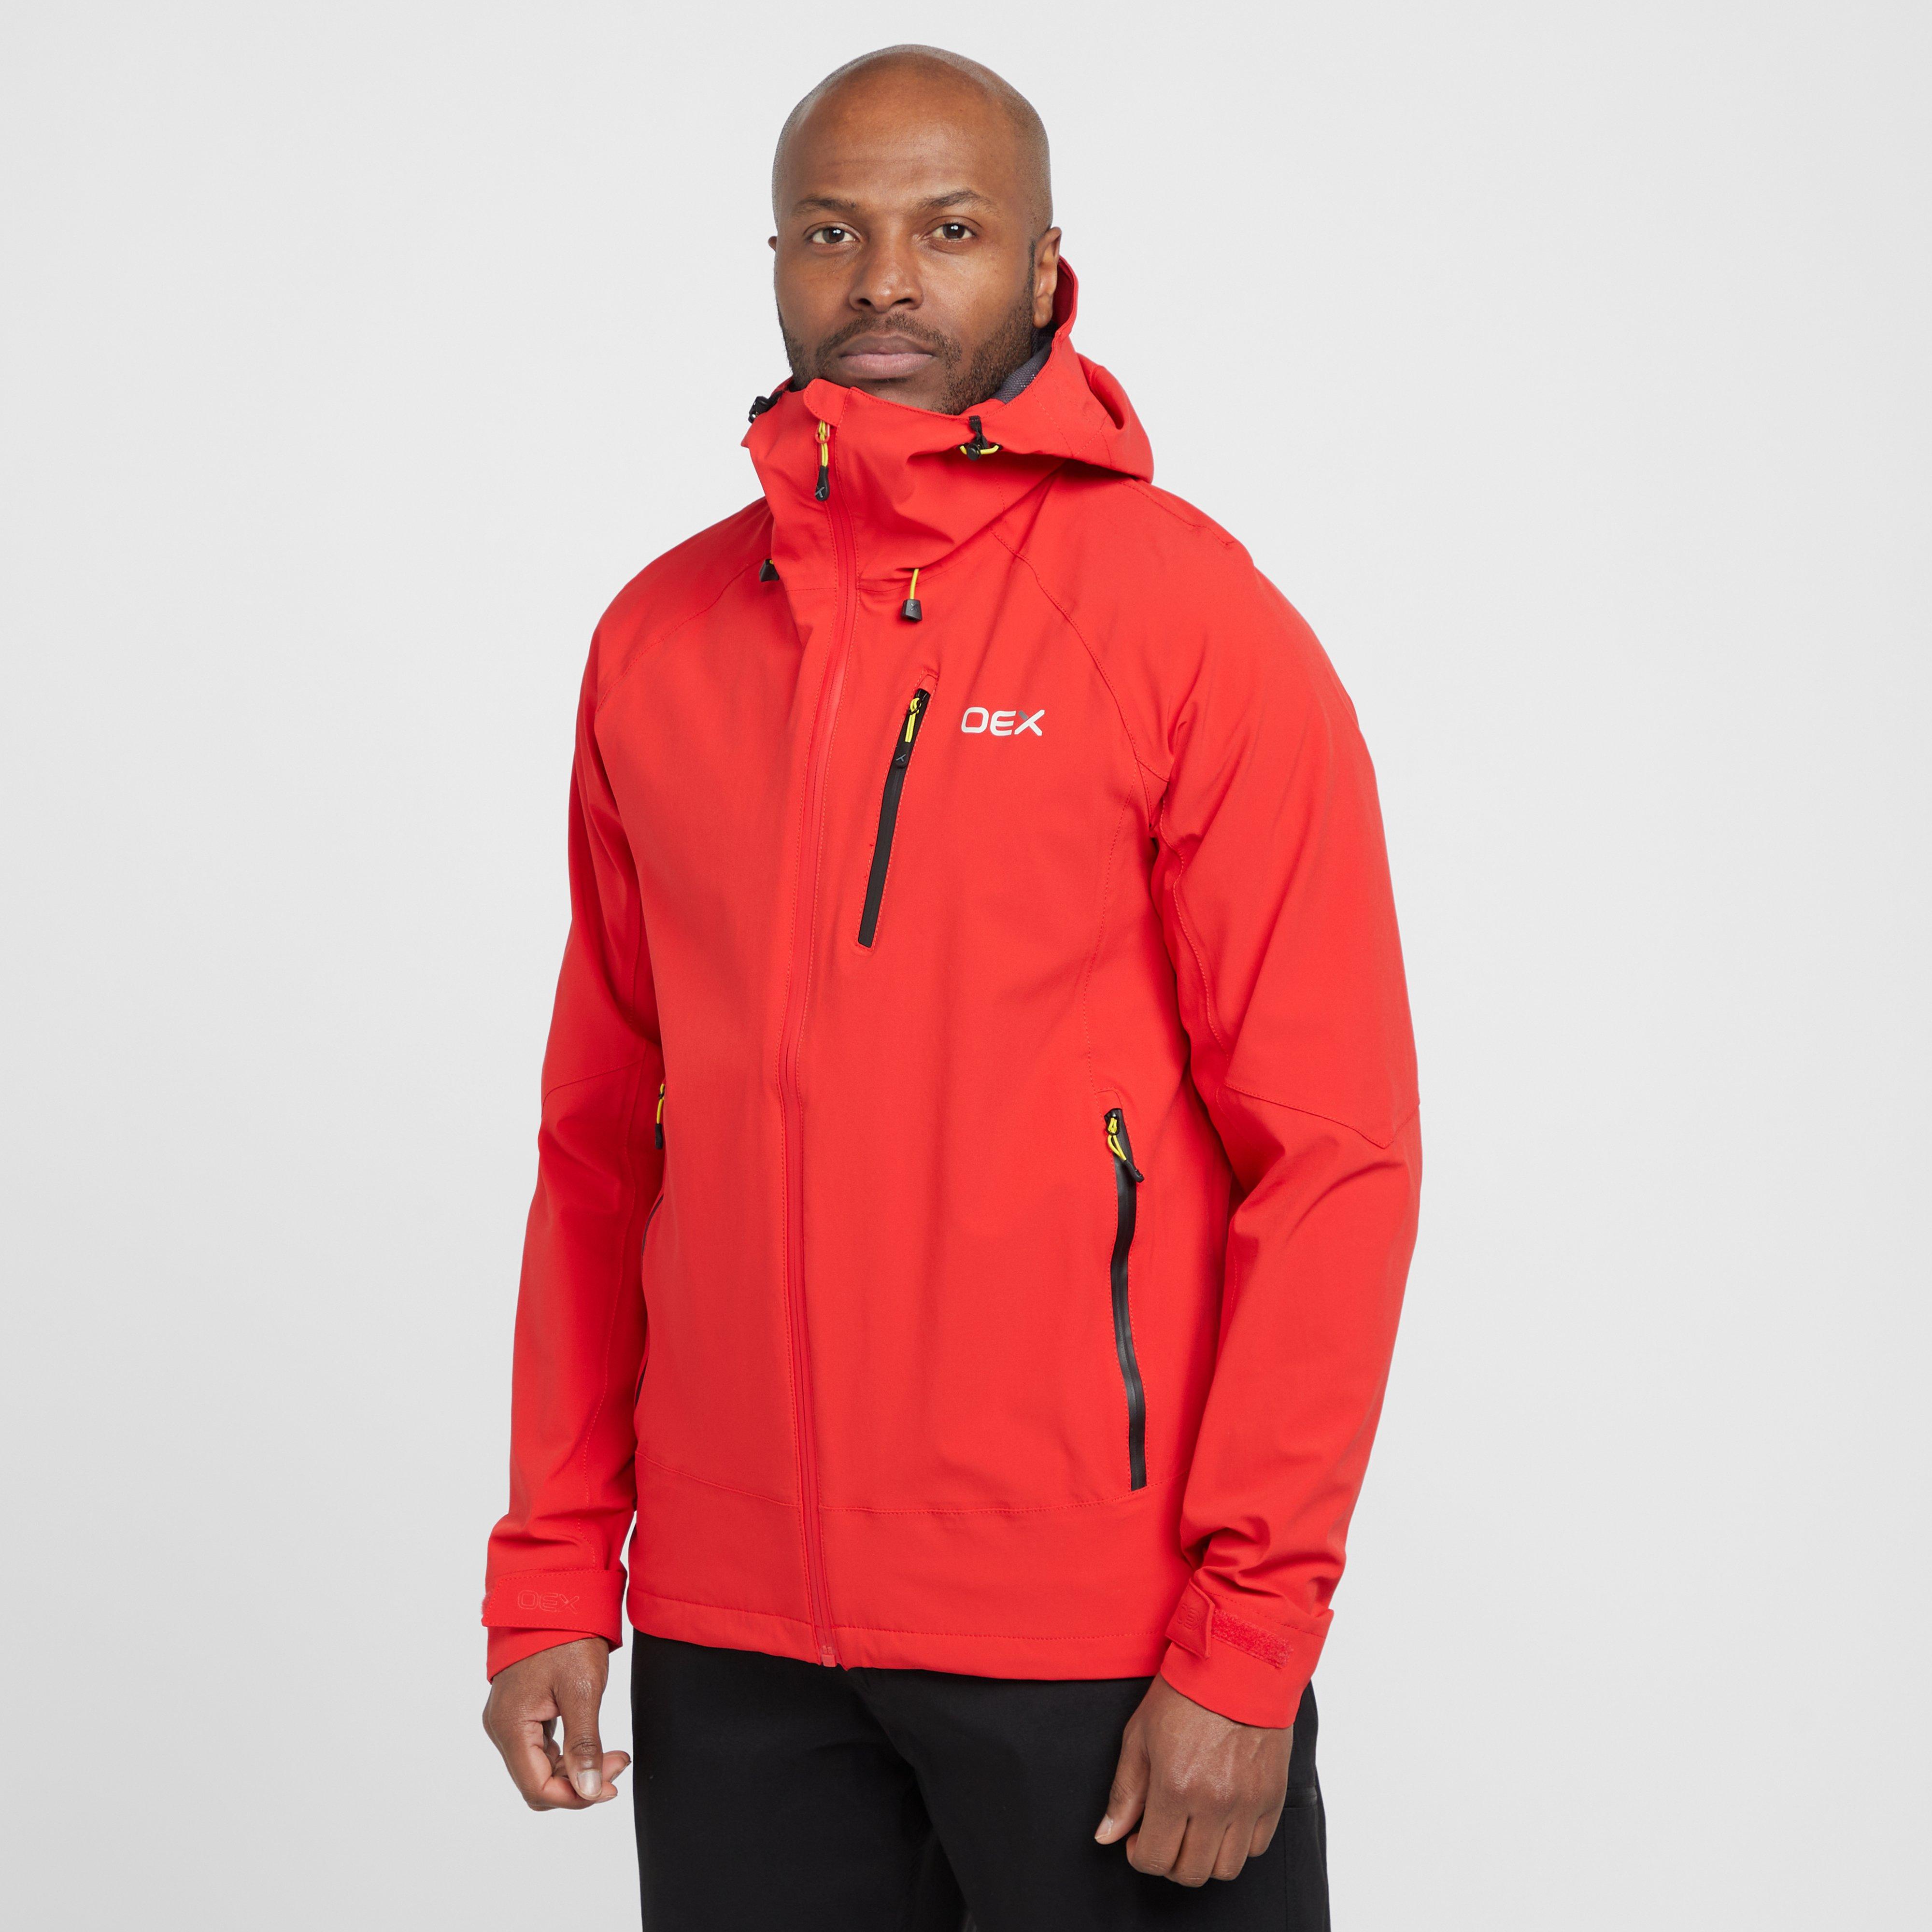 Oex Mens Aonach Waterproof Jacket - Red/red  Red/red